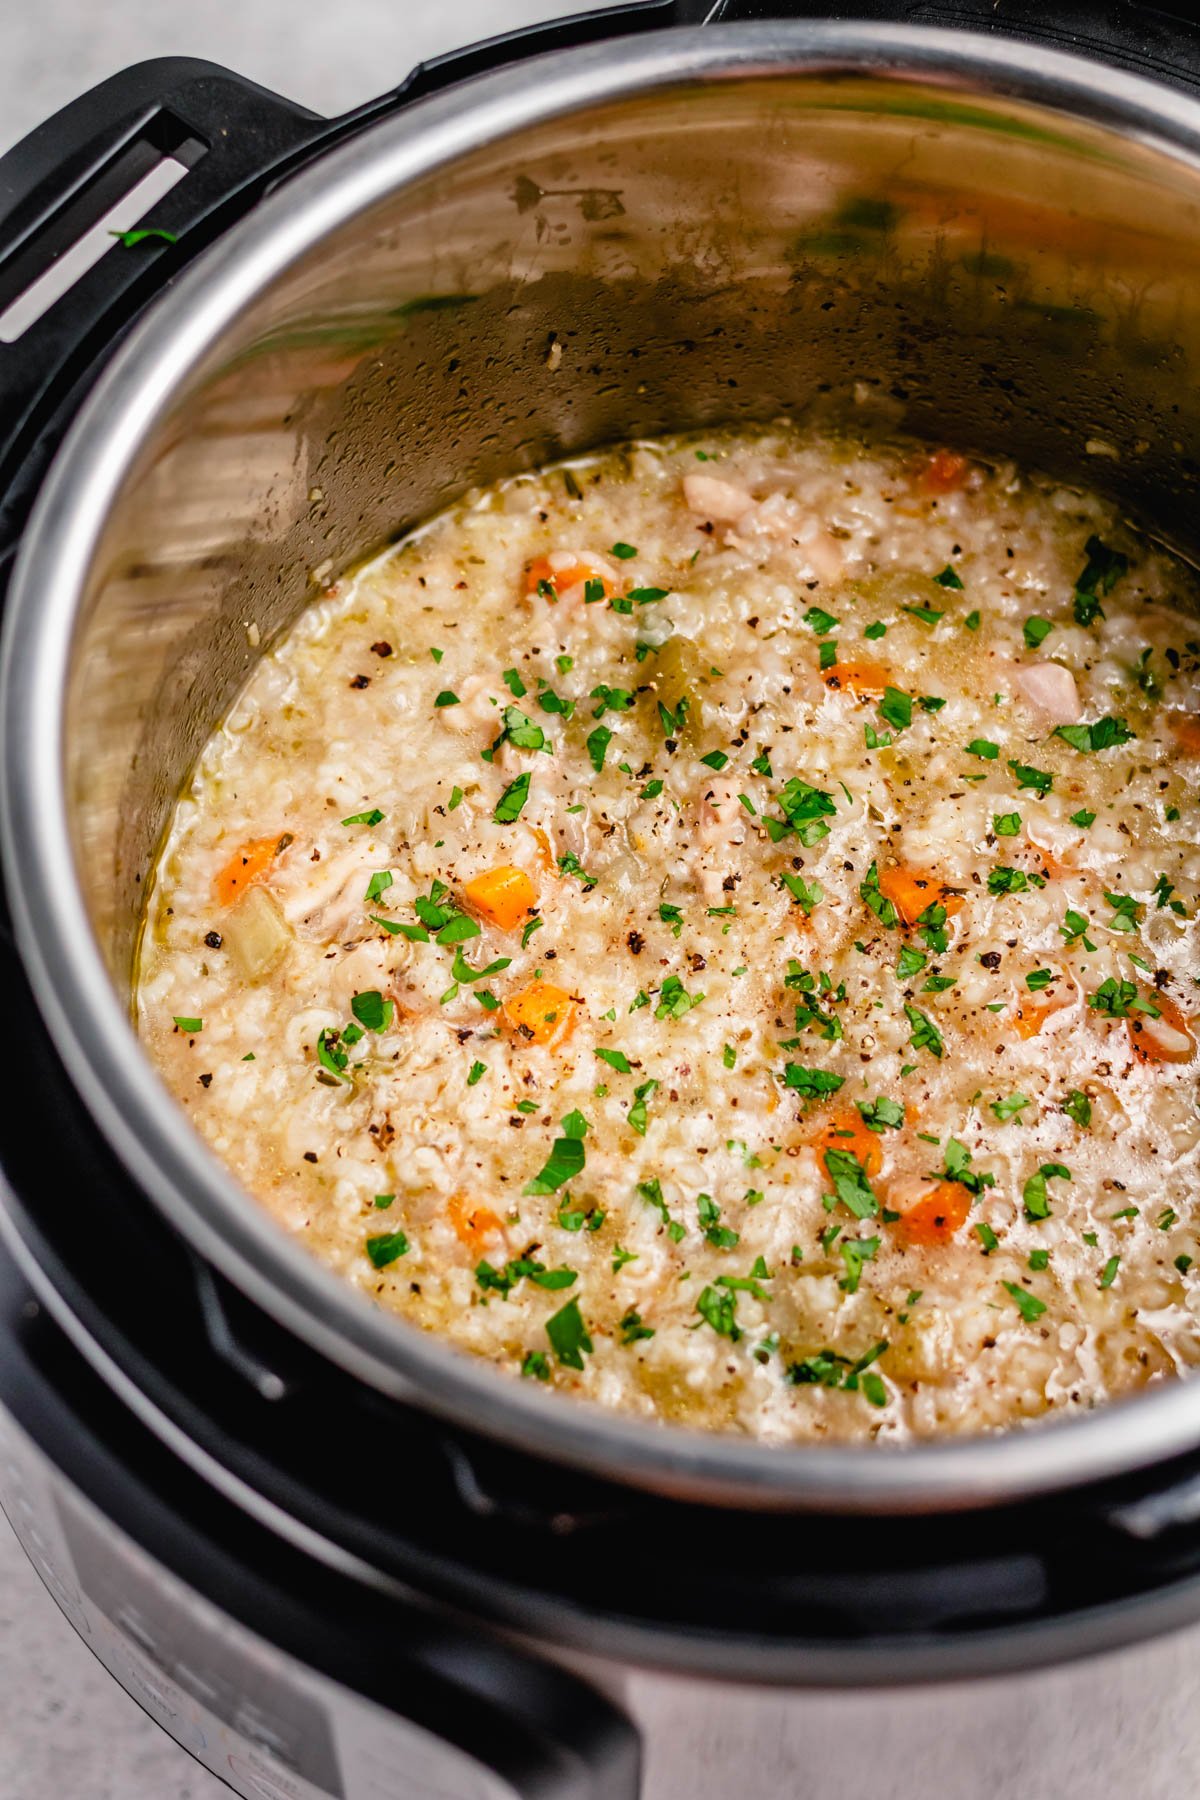 Instant pot chicken and rice soup is the perfect way to get a fulfilling, hearty soup on the table fast. It has minimal prep and is both gluten free and dairy free, and because it's done in the instant pot there's only one dish to clean. This chicken soup is perfect for a family meal on its own or a starter or side for a gathering. Plus it's ready in under 30 minutes! #glutenfreerecipes #dairyfreerecipes #healthychickenrecipes #chickensouprecipes #glutenfreedairyfreerecipes #instantpotrecipes